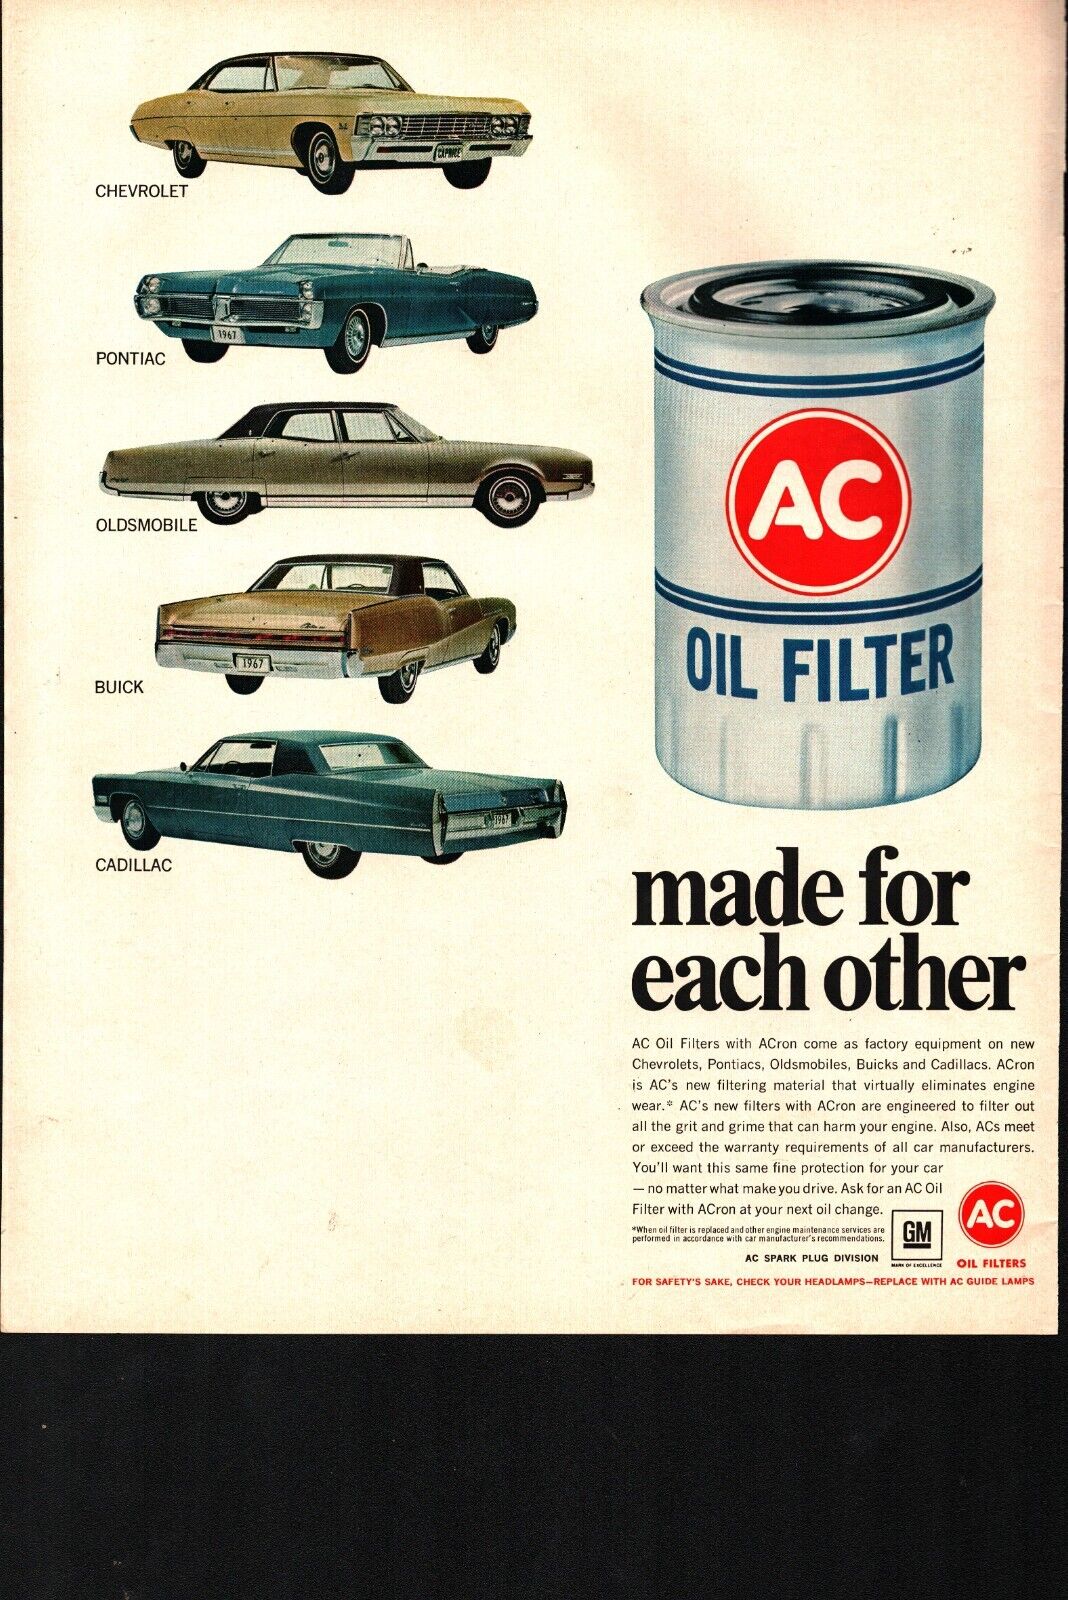 1967 AC Oil Filter Made For Each Other Chevy Cadillac Buick Full Page Print Ad